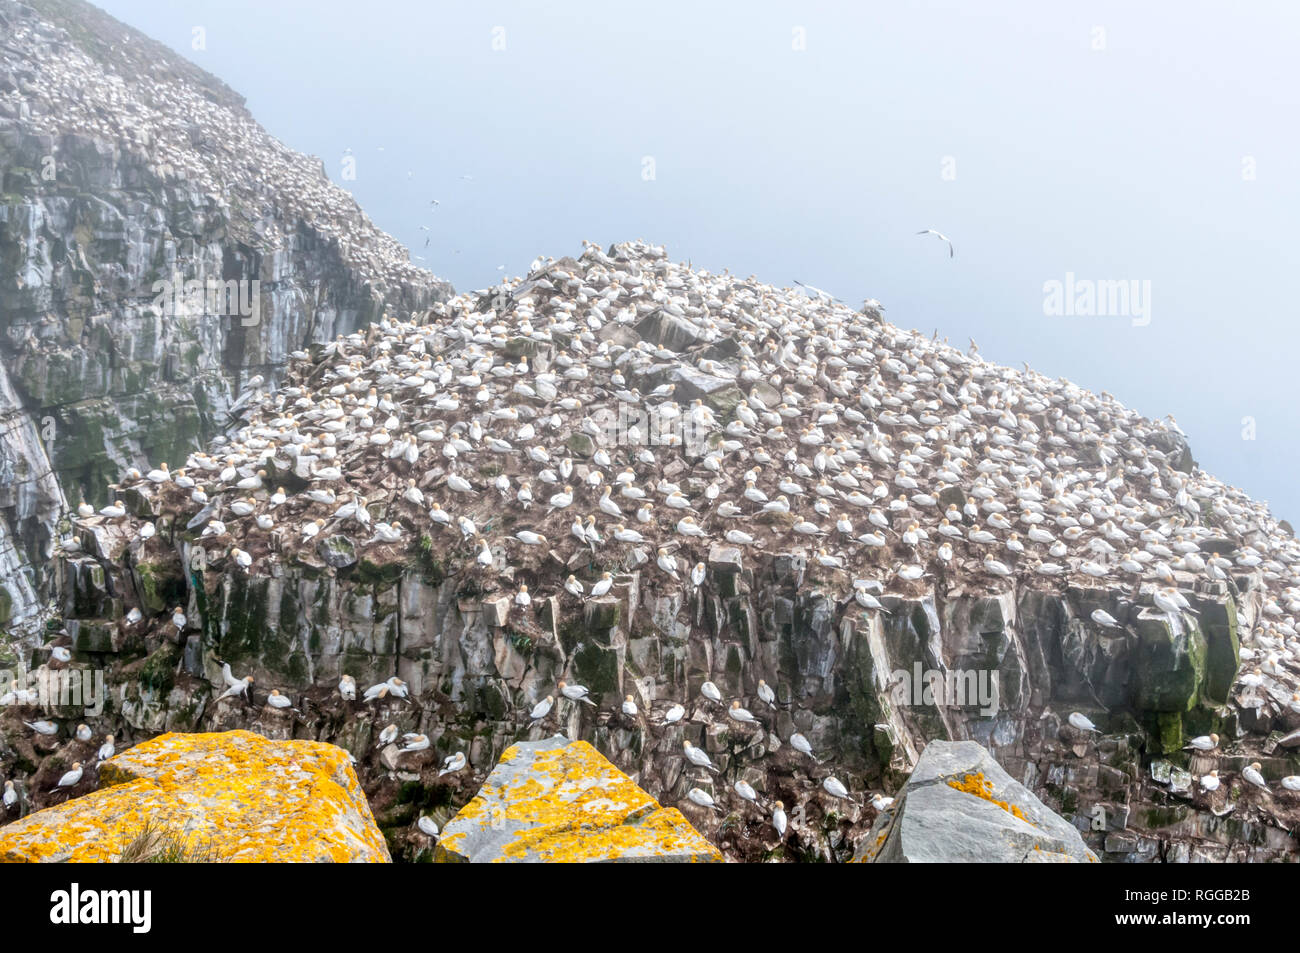 Northern gannets, Morus bassanus, nesting on Bird Rock at the Cape St. Mary's Ecological Reserve breeding colony in Newfoundland, Canada. Stock Photo